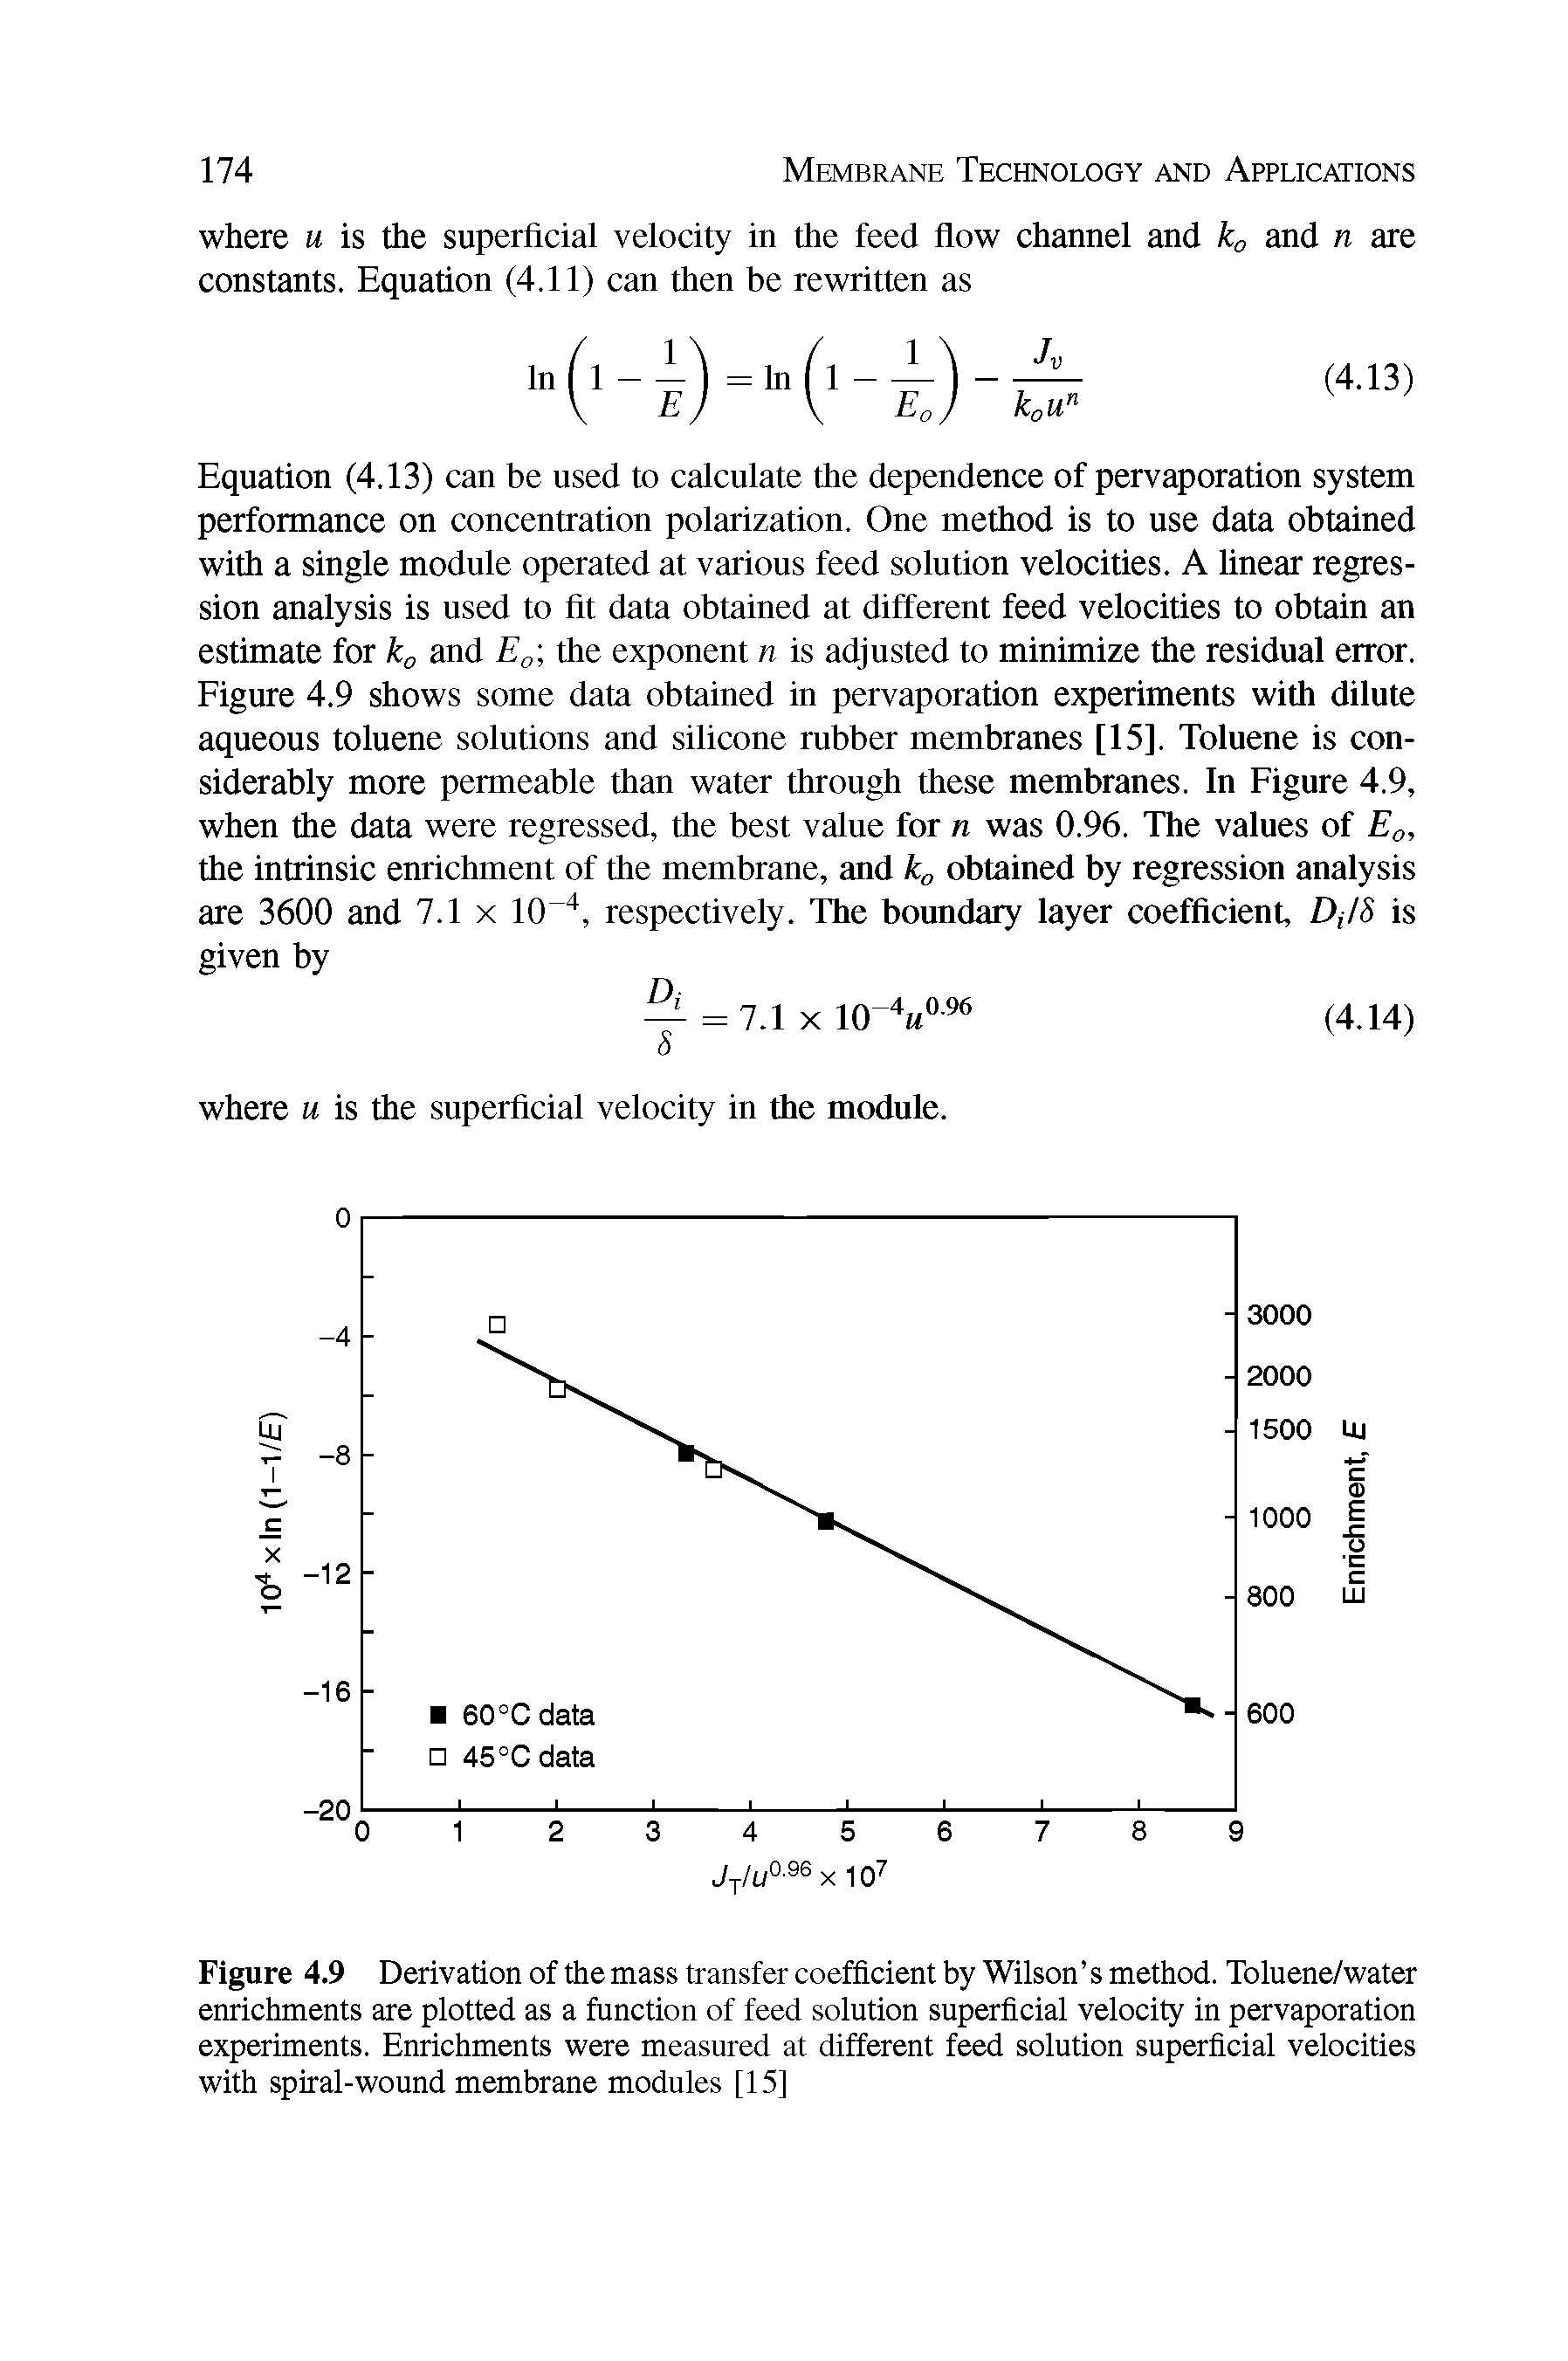 Figure 4.9 Derivation of the mass transfer coefficient by Wilson s method. Toluene/water enrichments are plotted as a function of feed solution superficial velocity in pervaporation experiments. Enrichments were measured at different feed solution superficial velocities with spiral-wound membrane modules [15]...